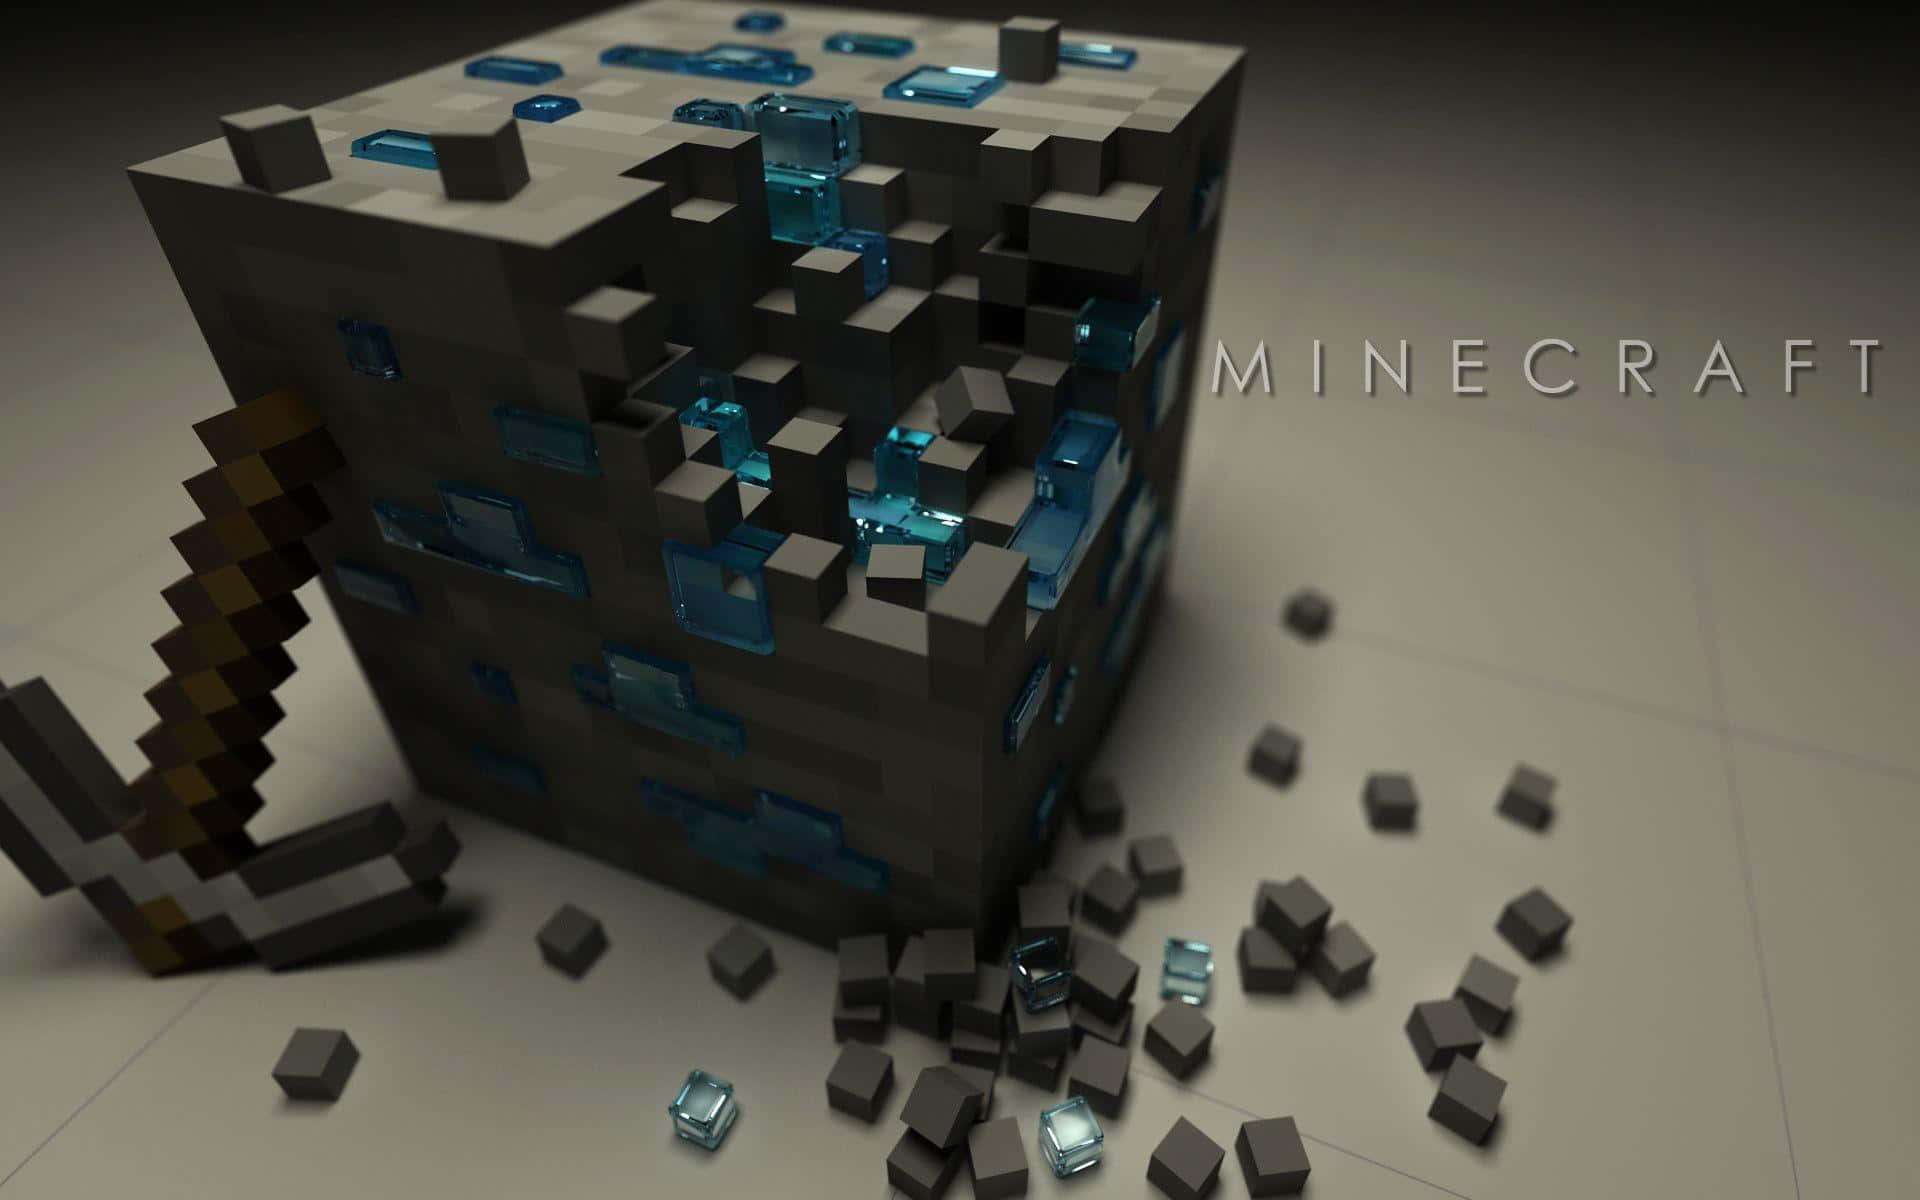 Experience the vivid world of Cool Minecraft